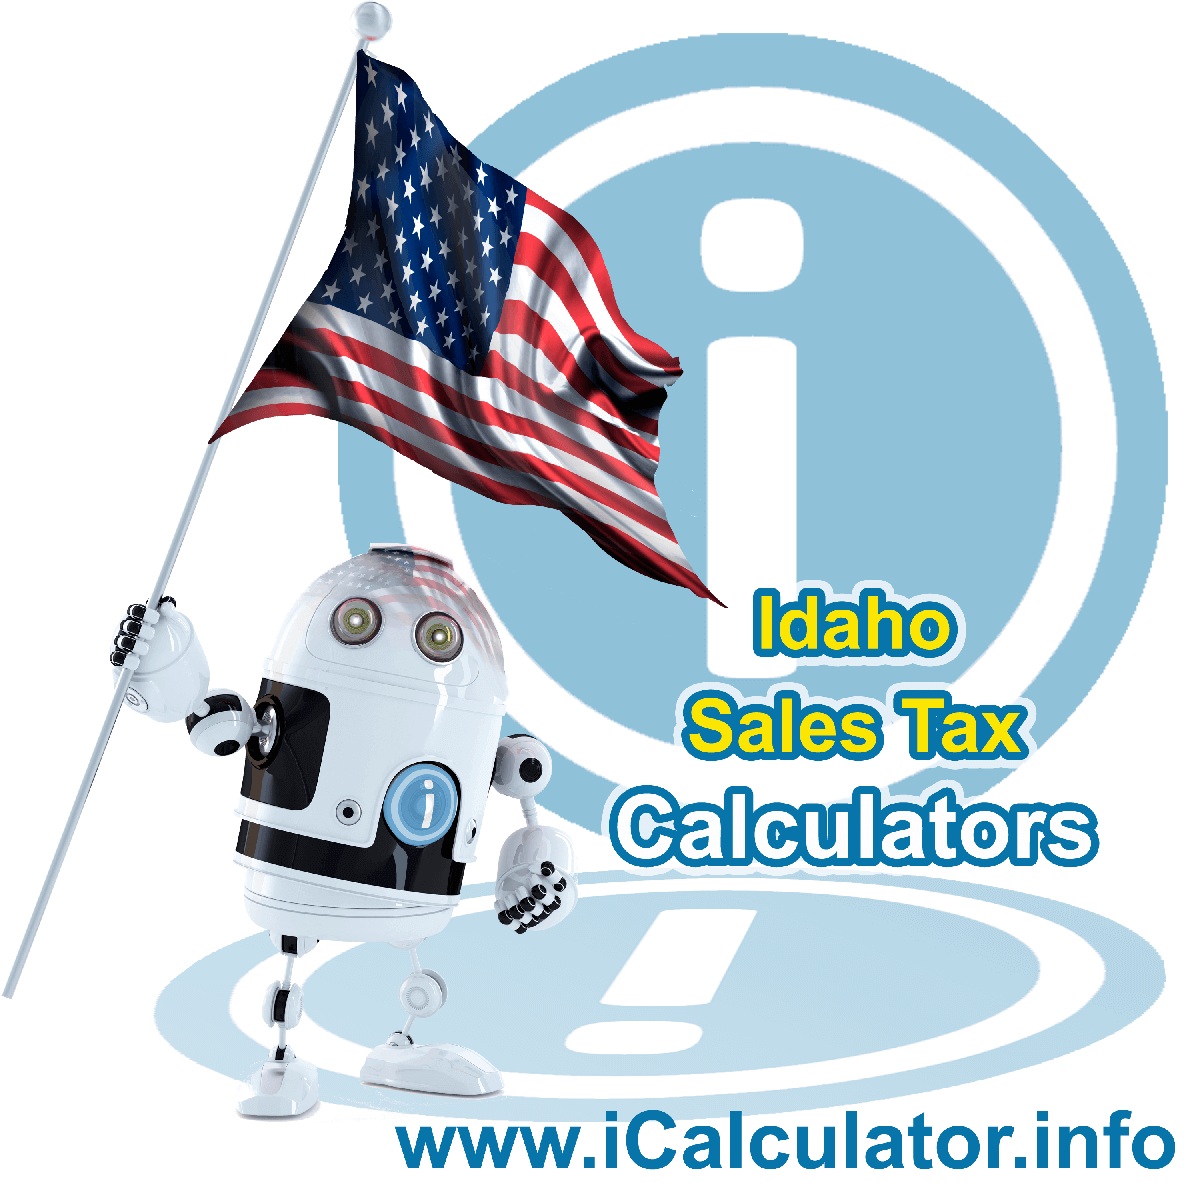 Blackfoot Sales Rates: This image illustrates a calculator robot calculating Blackfoot sales tax manually using the Blackfoot Sales Tax Formula. You can use this information to calculate Blackfoot Sales Tax manually or use the Blackfoot Sales Tax Calculator to calculate sales tax online.